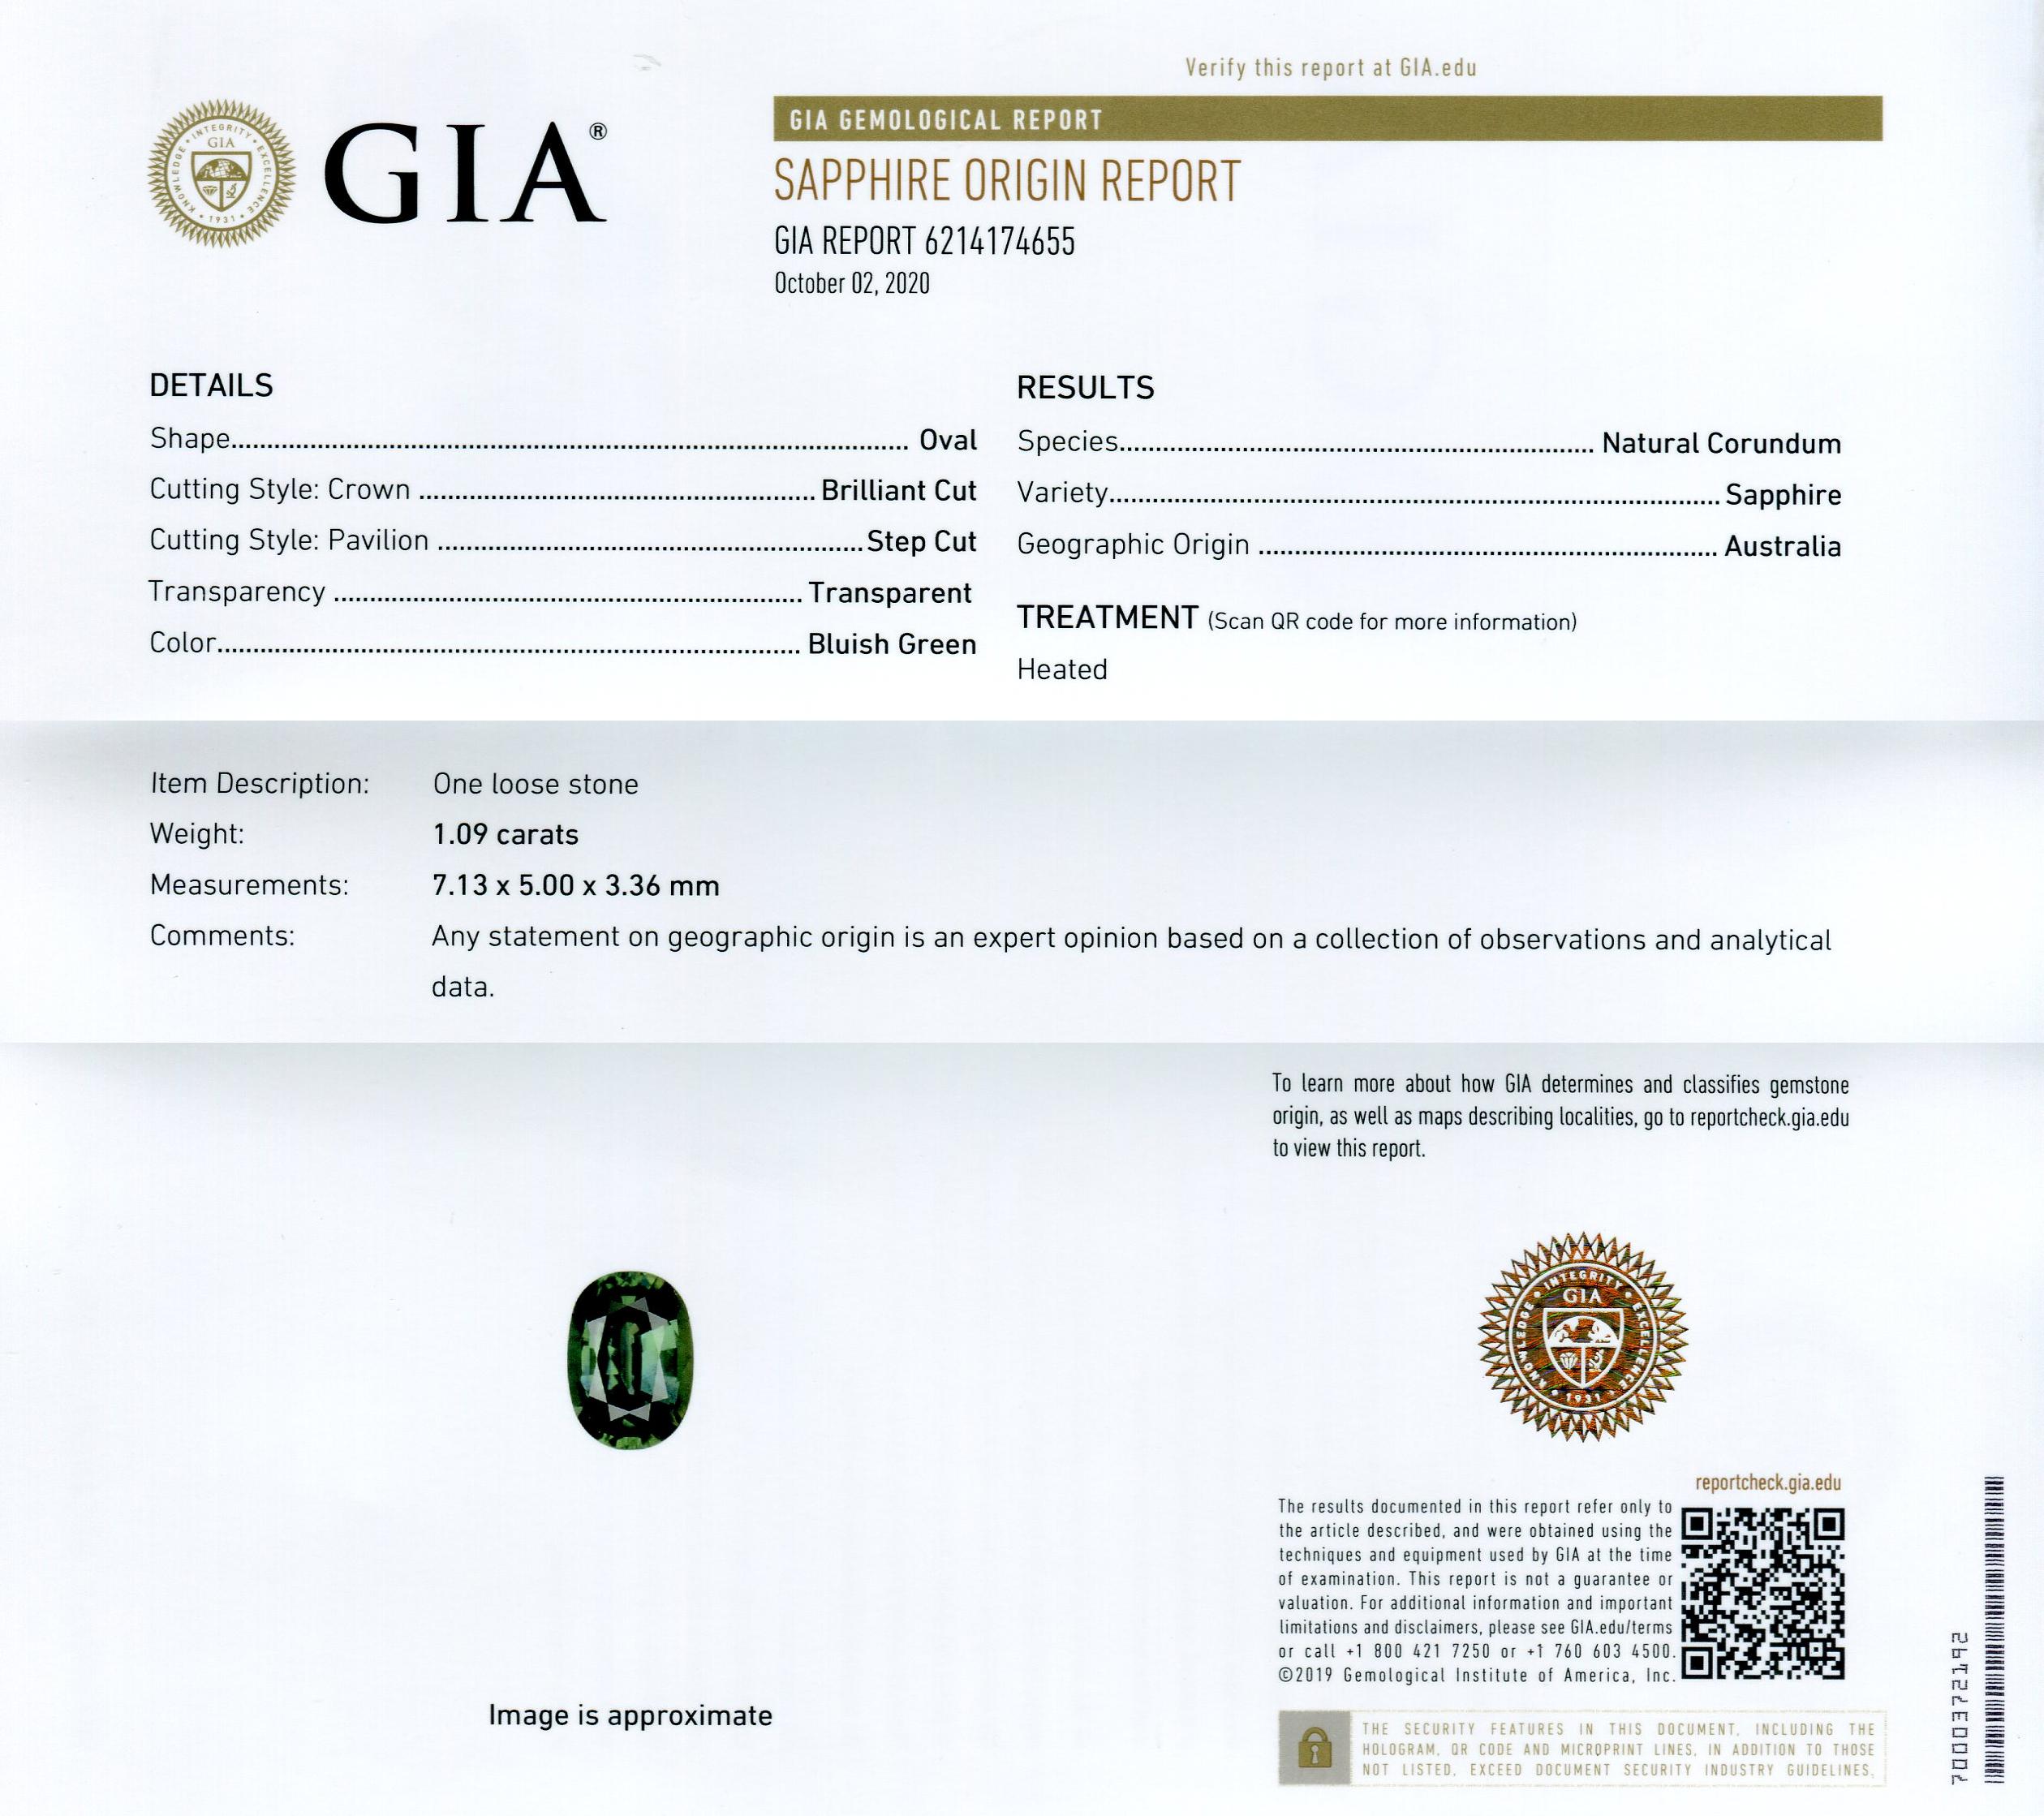 This is a stunning GIA Certified Sapphire 

The GIA report reads as follows:

GIA Report Number: 6214174655
Shape: Oval
Cutting Style: 
Cutting Style: Crown: Brilliant Cut
Cutting Style: Pavilion: Step Cut
Transparency: Transparent
Color: Bluish